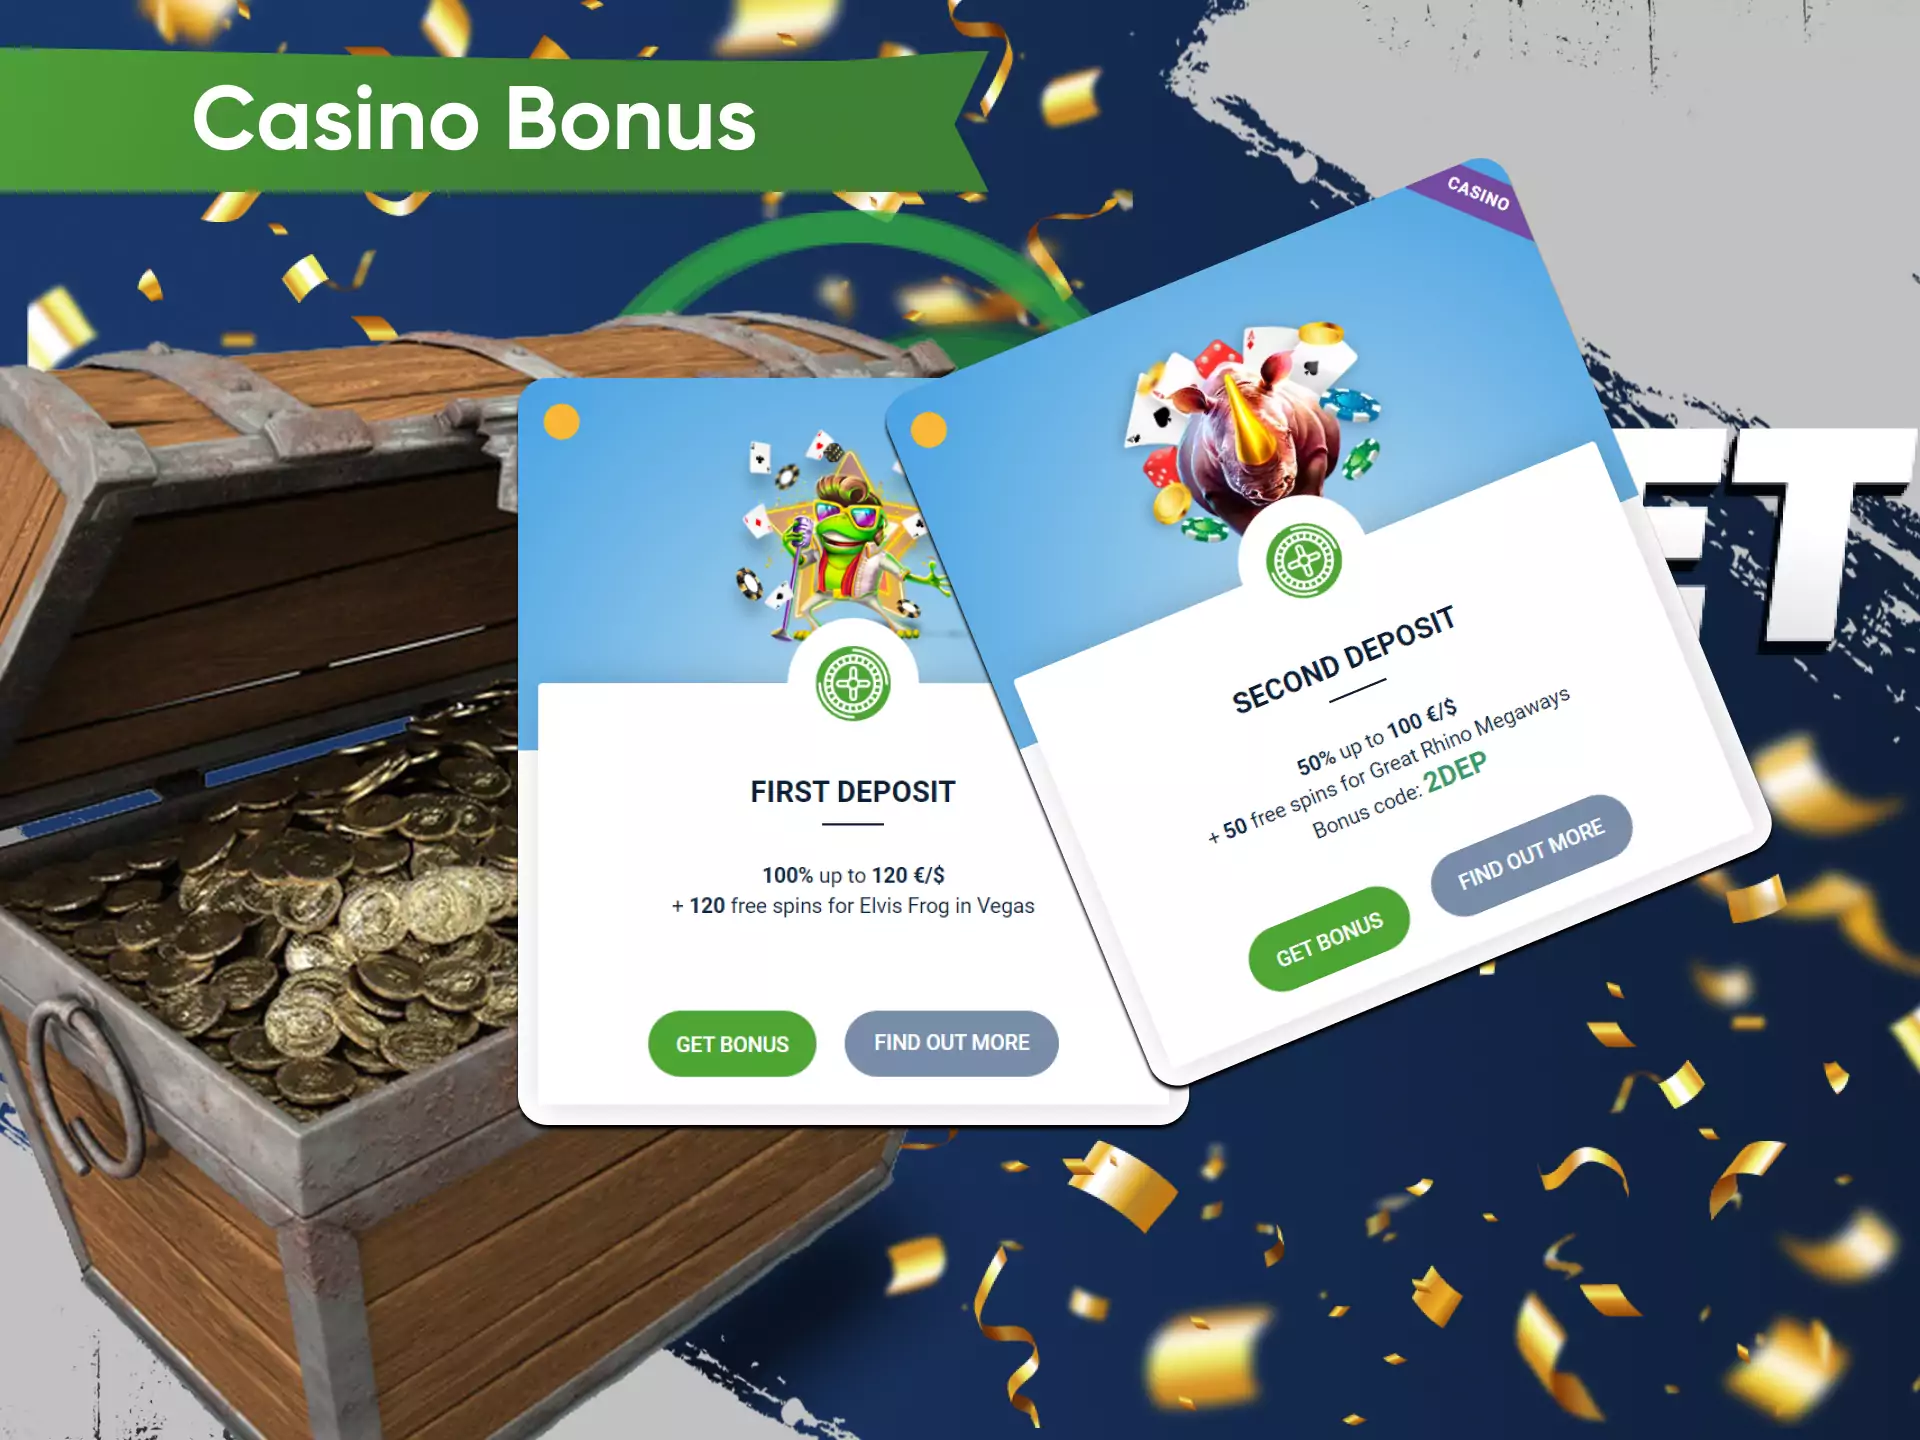 For playing casino games on 20bet, use the welcome offer from the bookmaker.